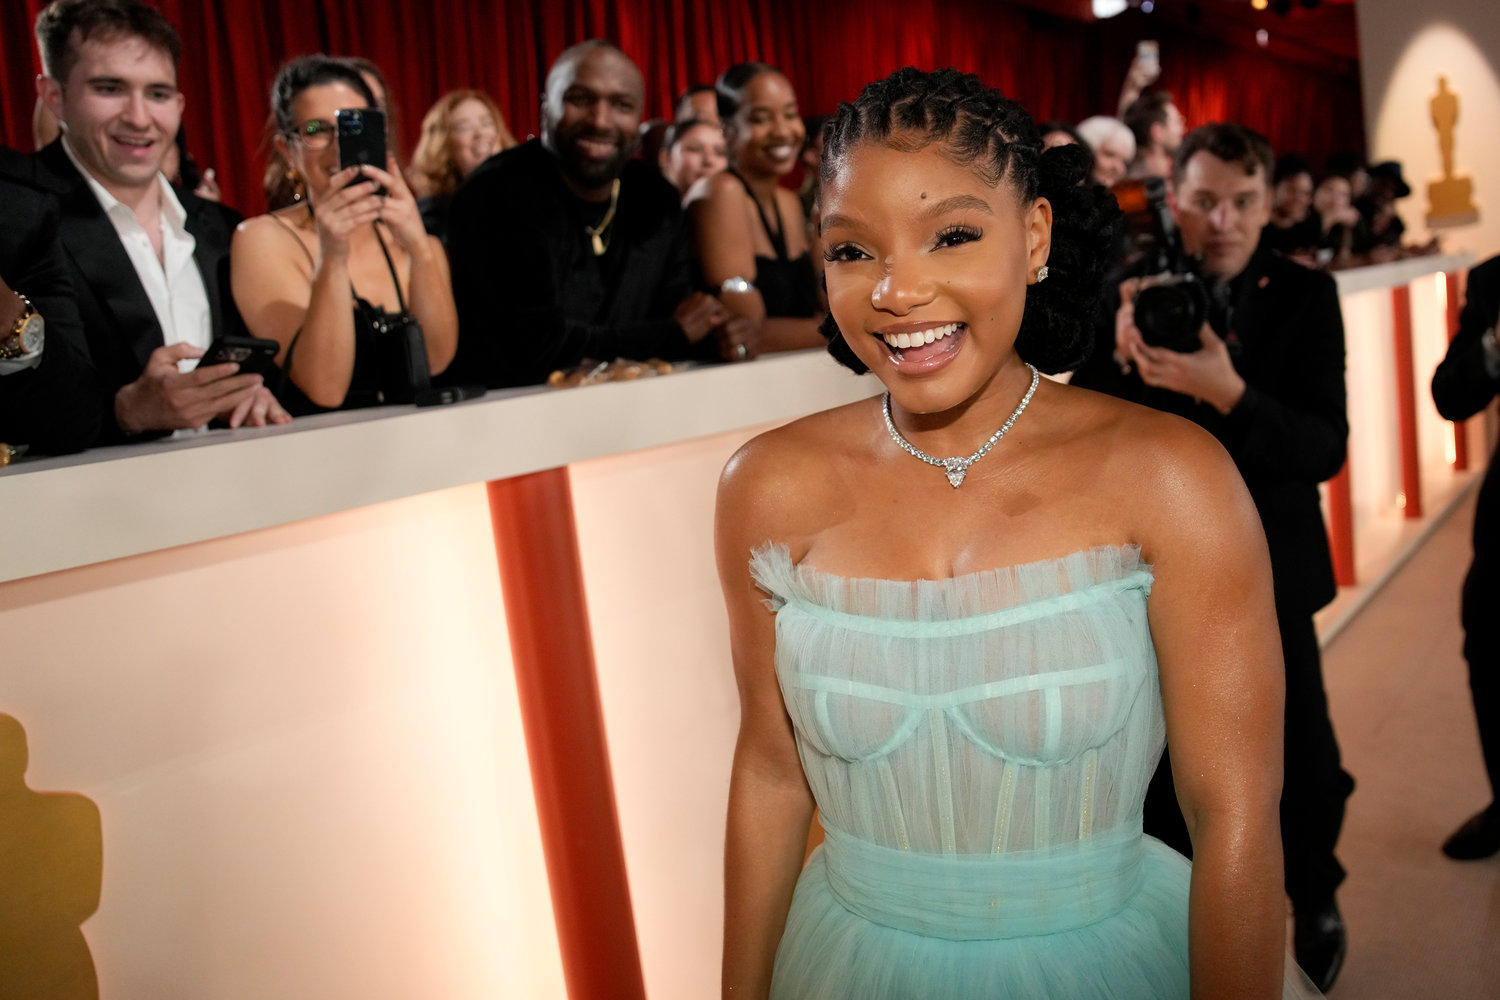 Halle Bailey arrives at the Oscars on Sunday, March 12, 2023, at the Dolby Theatre in Los Angeles. (AP Photo/John Locher)